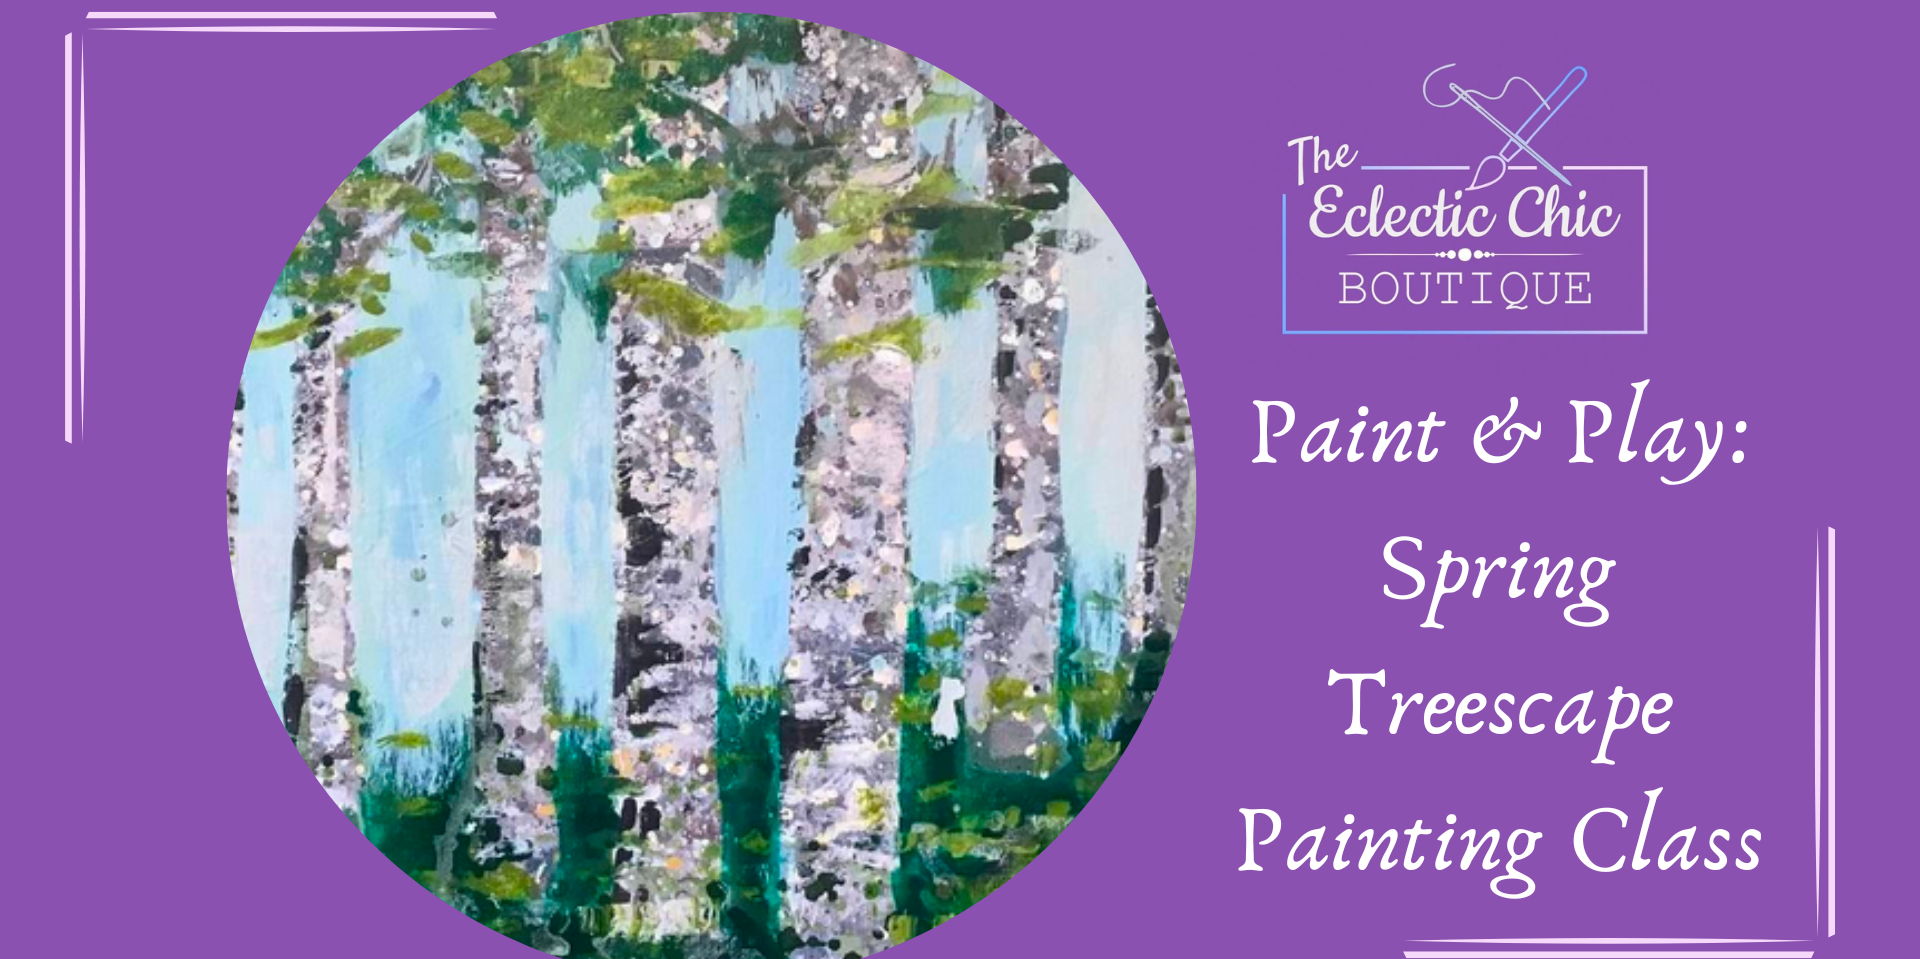 Paint & Play: Spring Treescape Painting Class promotional image